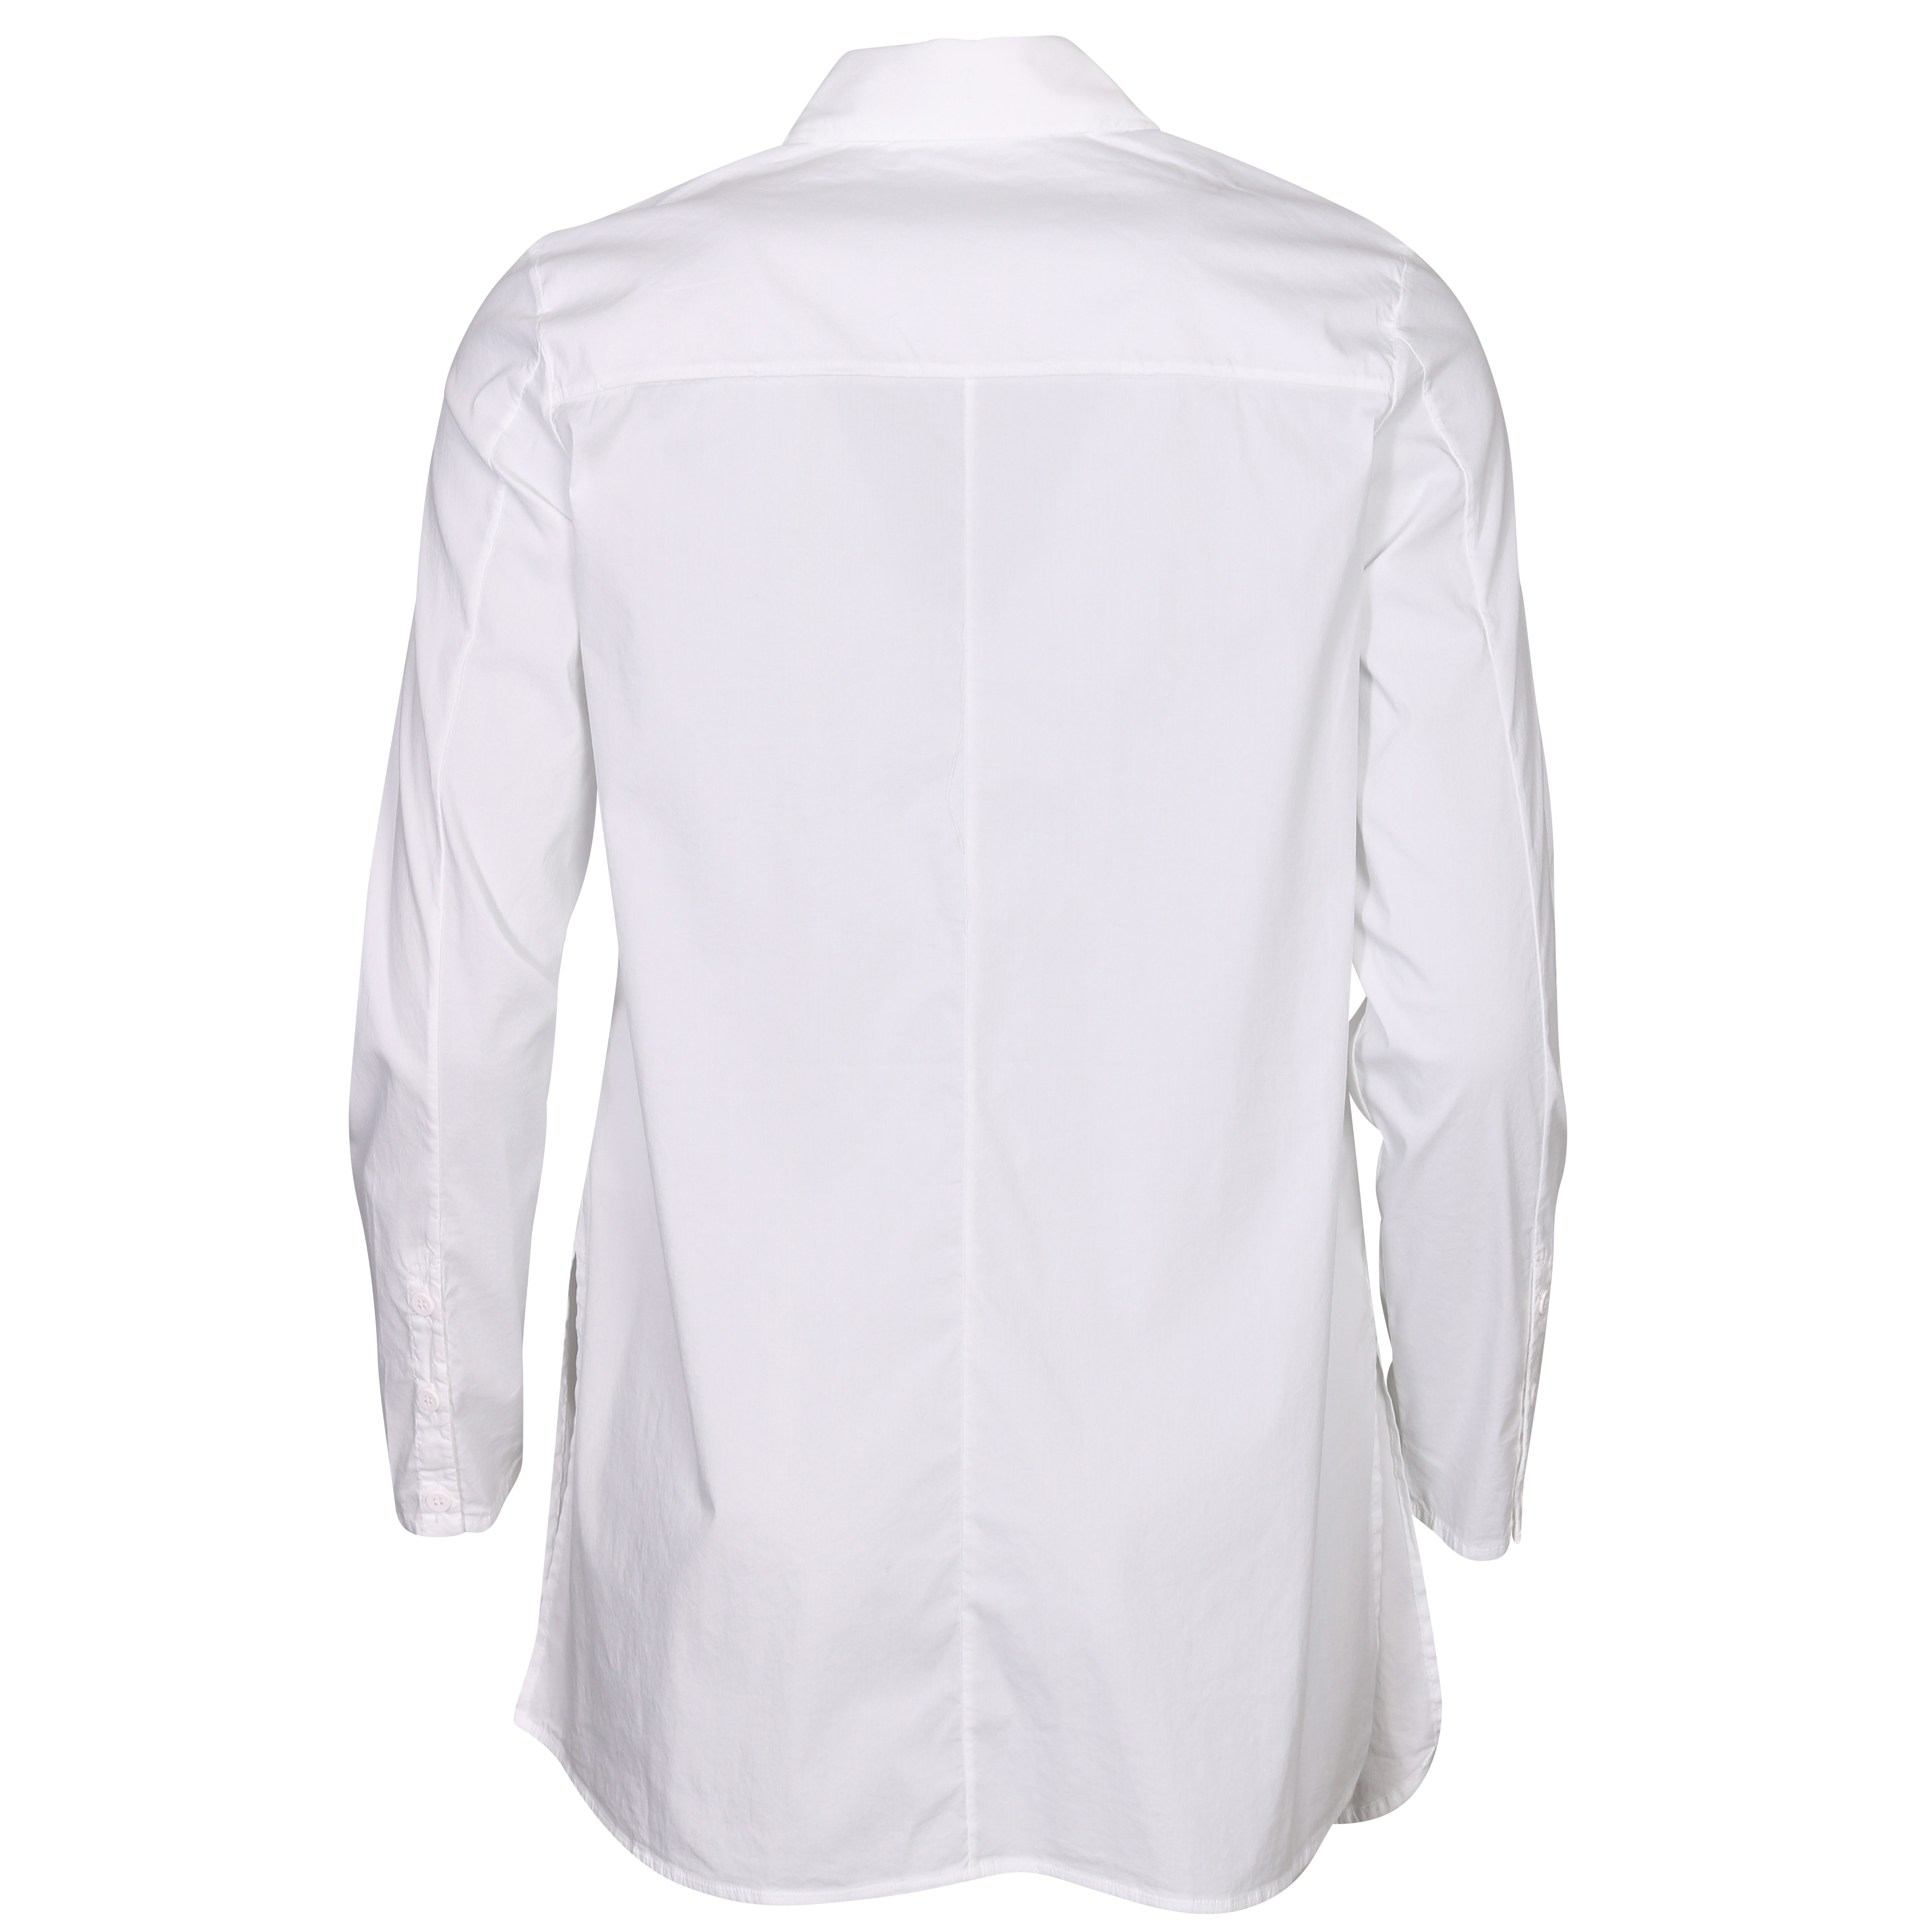 Transit Par Such Blouse in White S